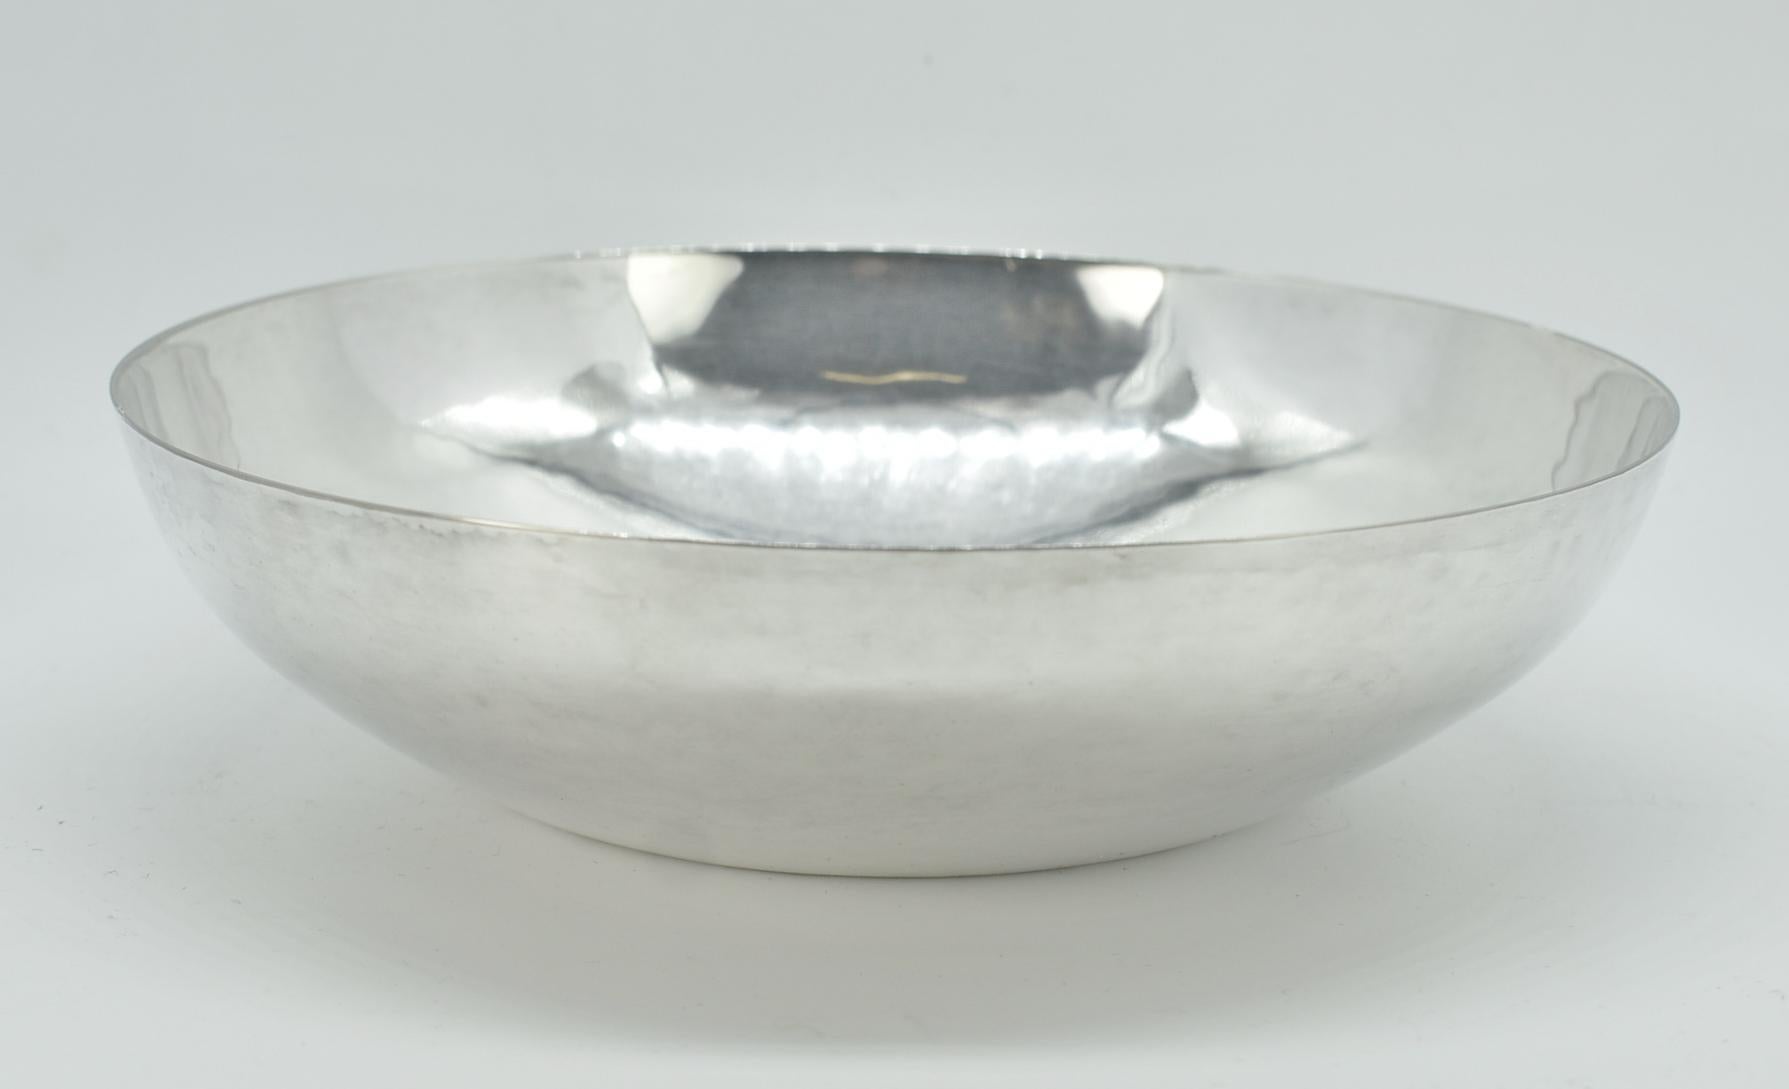 Gorham Silver-plated MMA (Metropolitan Museum of Art) Reproduction - 14th Century Medieval Hanap French Bowl. A vintage silver-plated bowl made by Gorham. Limited reproduction hanap bowl of the 14th Century French Provincial Period. Lightly hammered